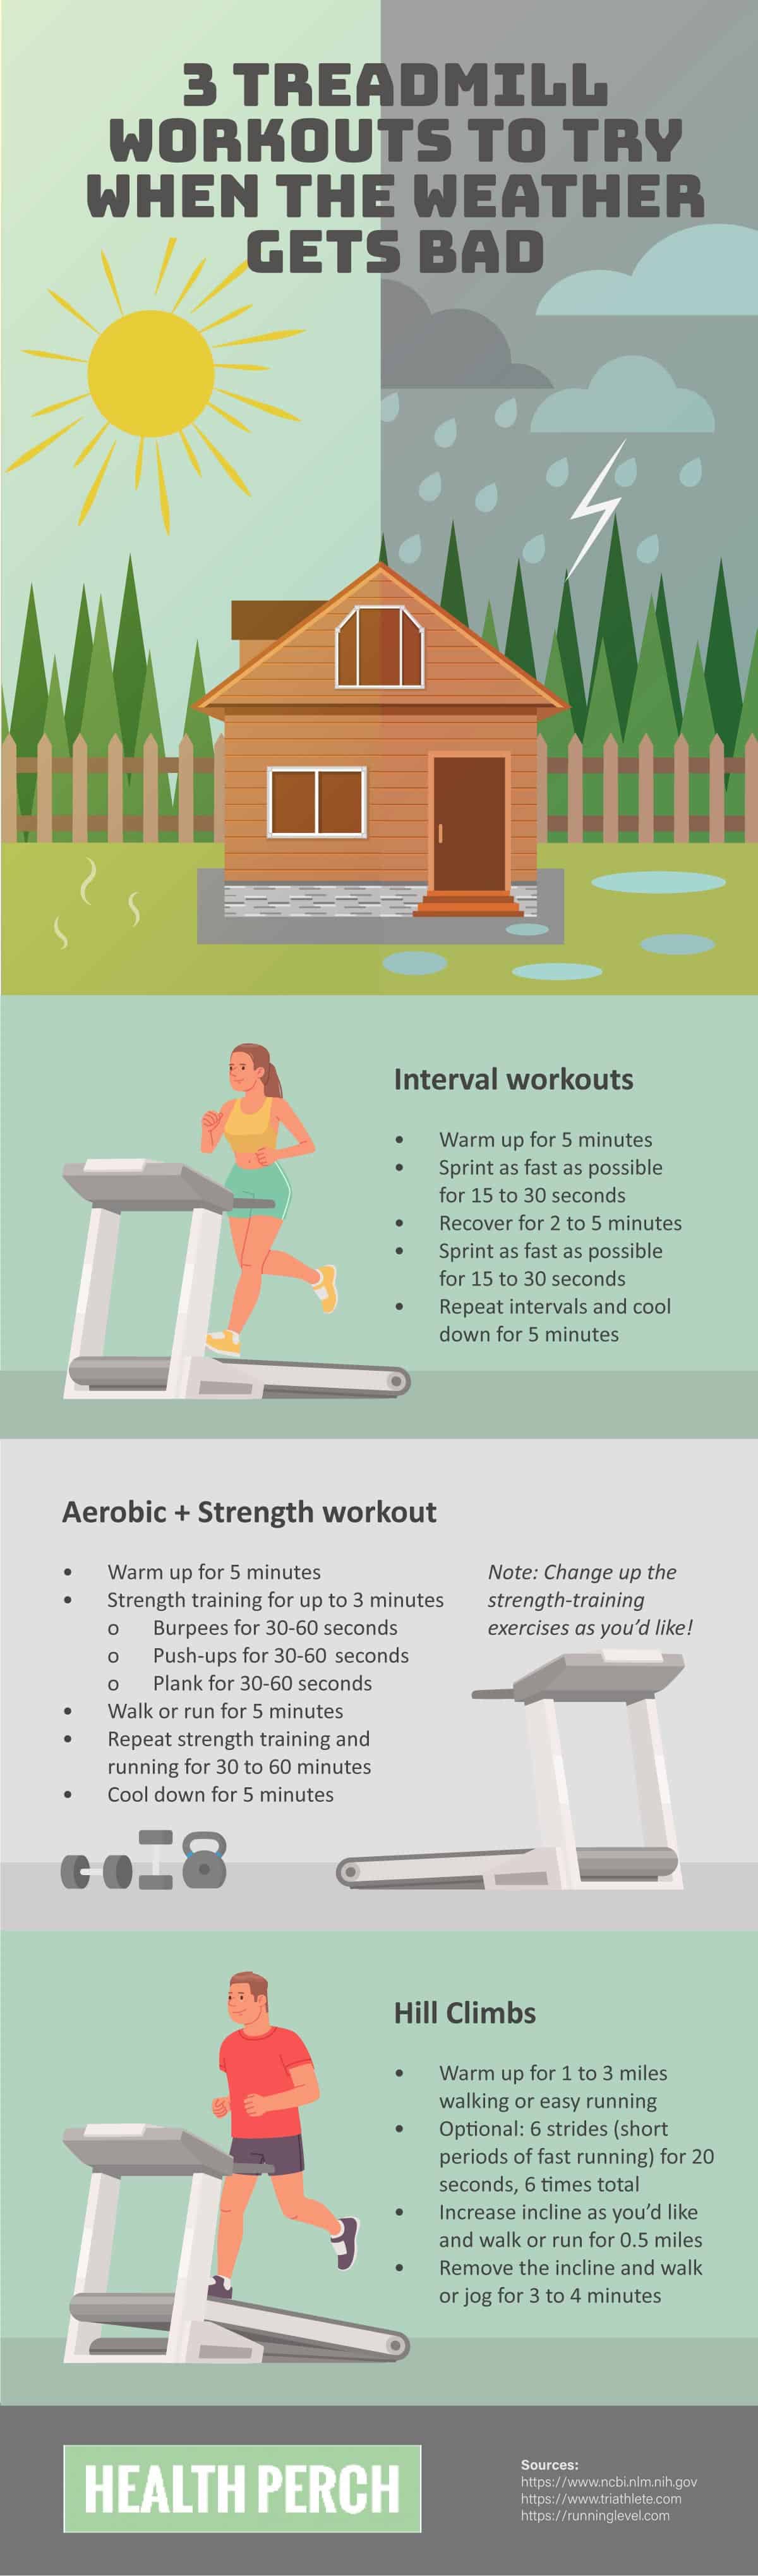 Treadmill Workouts to Try When the Weather Gets Bad Infographic